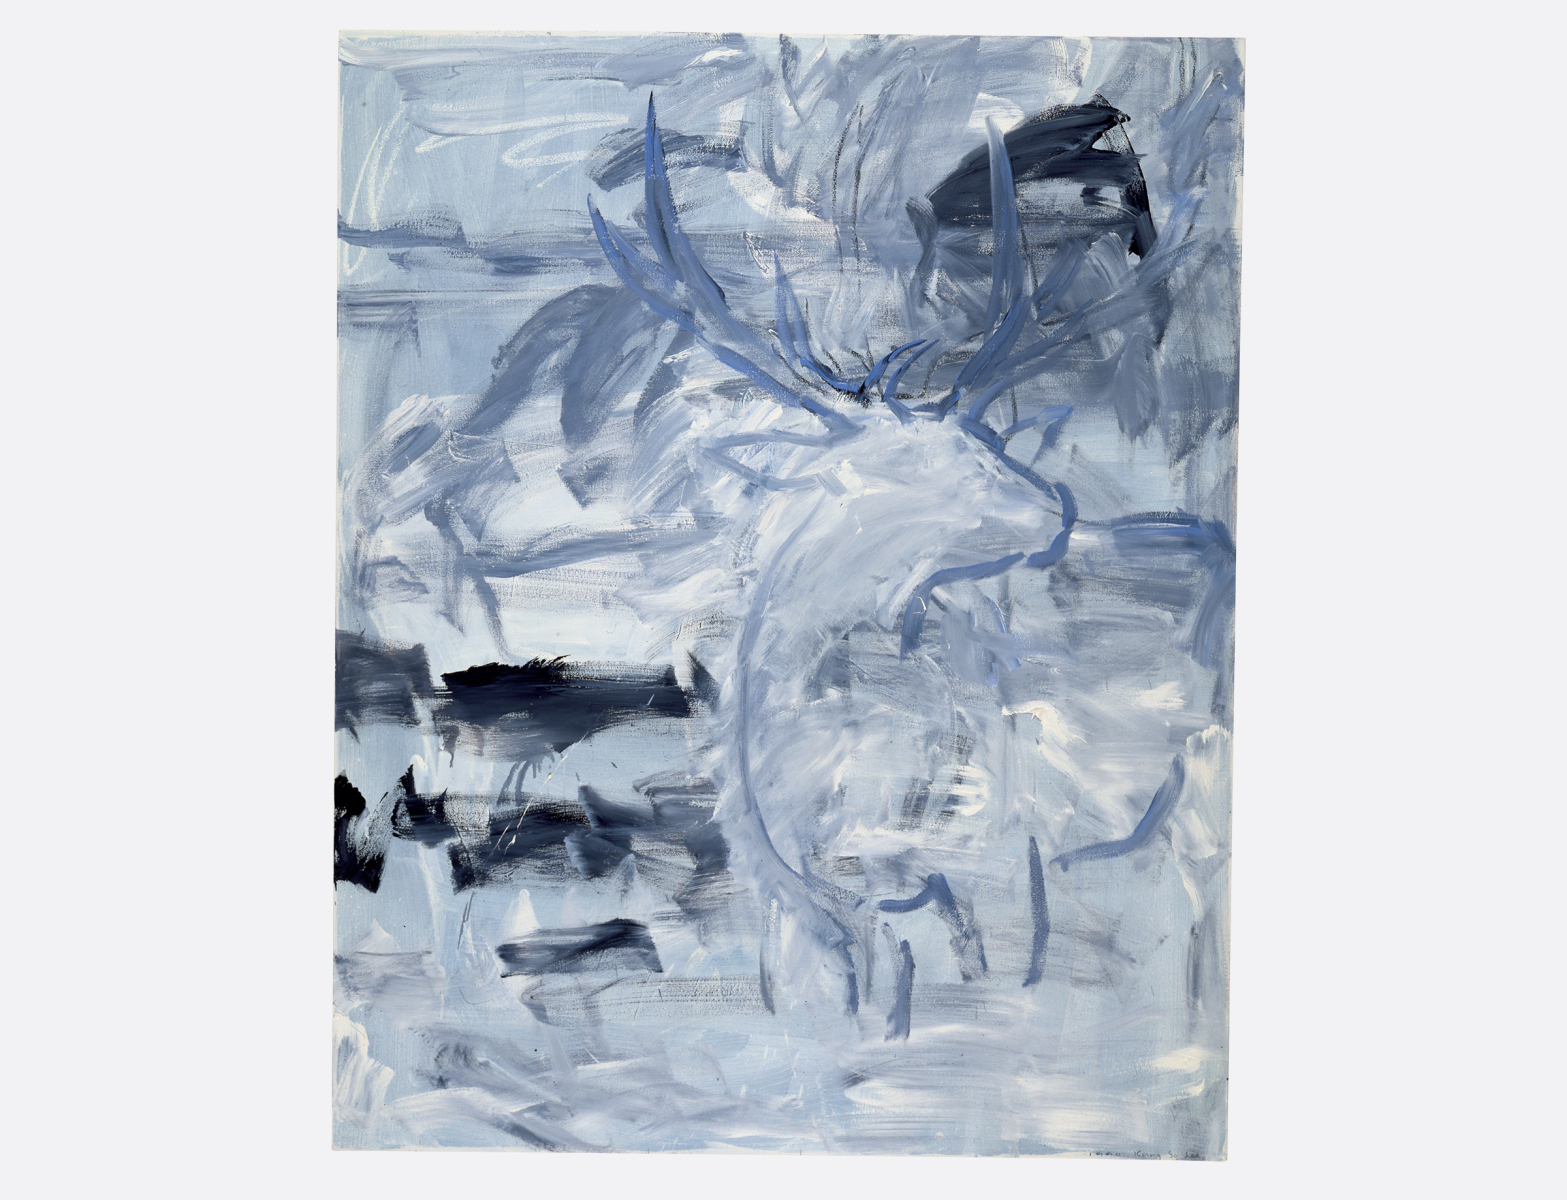 Untitled-90131, 1990, Oil on Canvas, 130.3x162.2cm